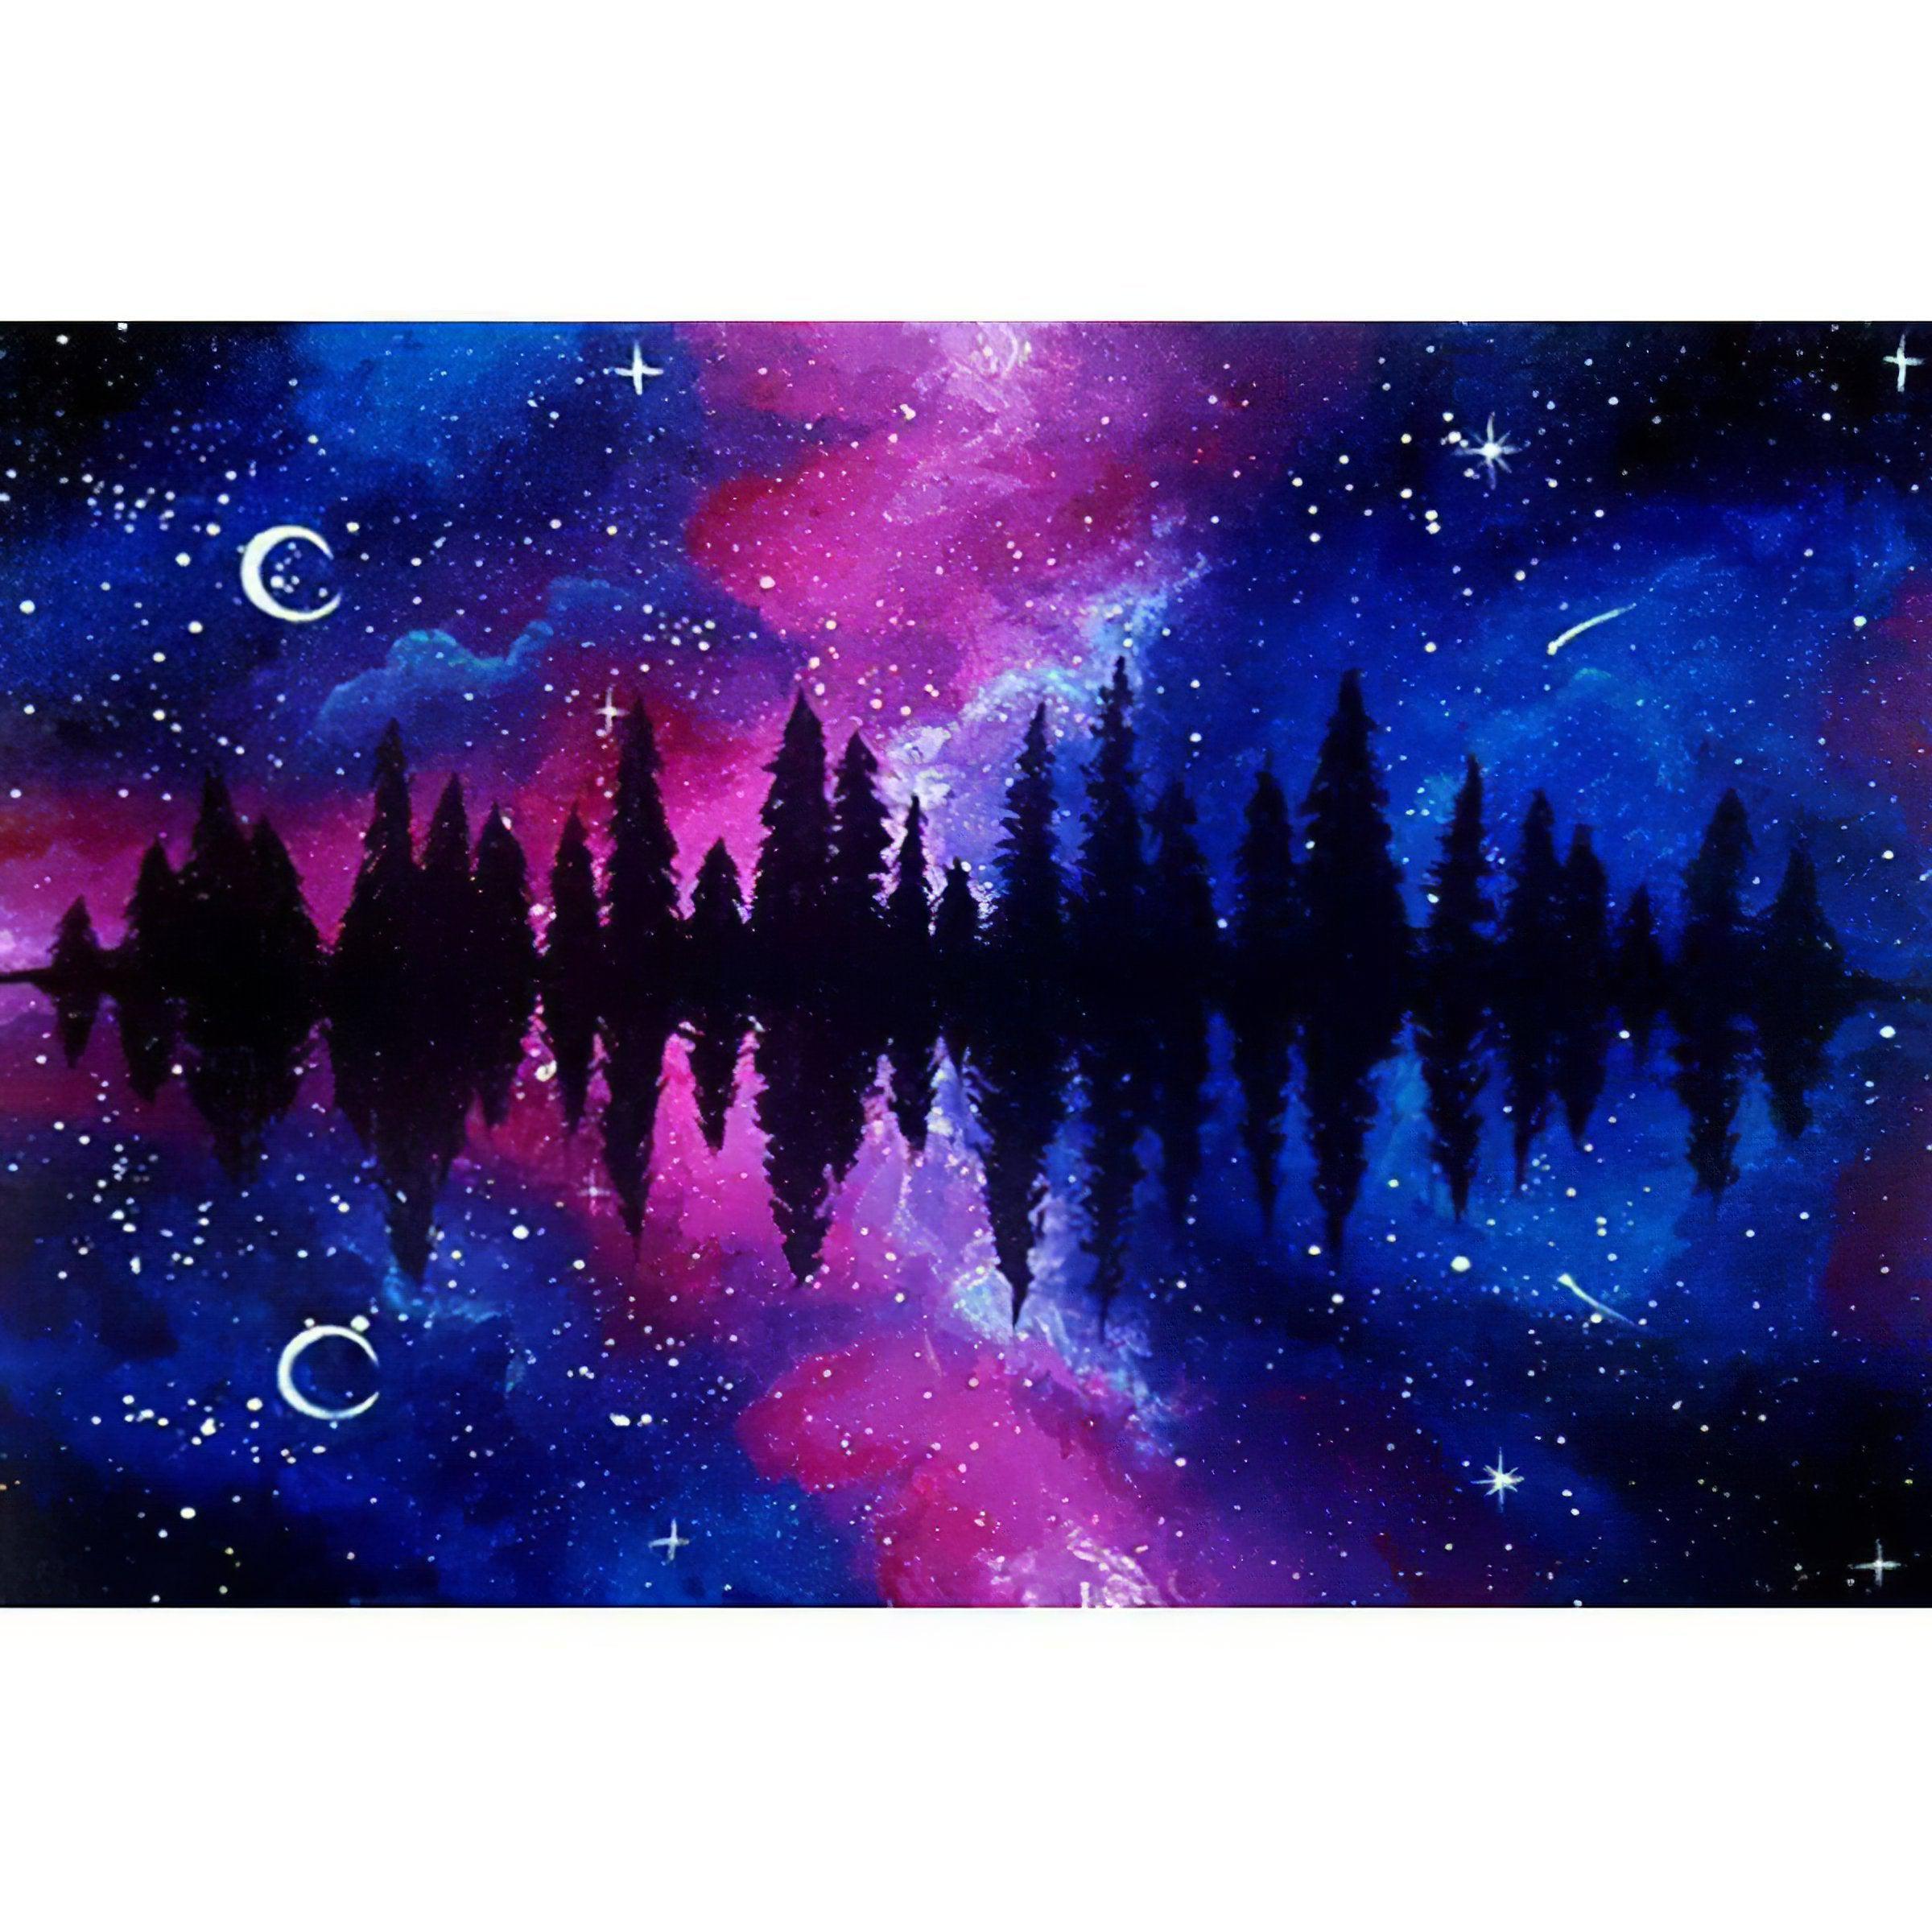 Delve into a forest intertwined with cosmic wonders.Forest And Mystical Universe - Diamondartlove